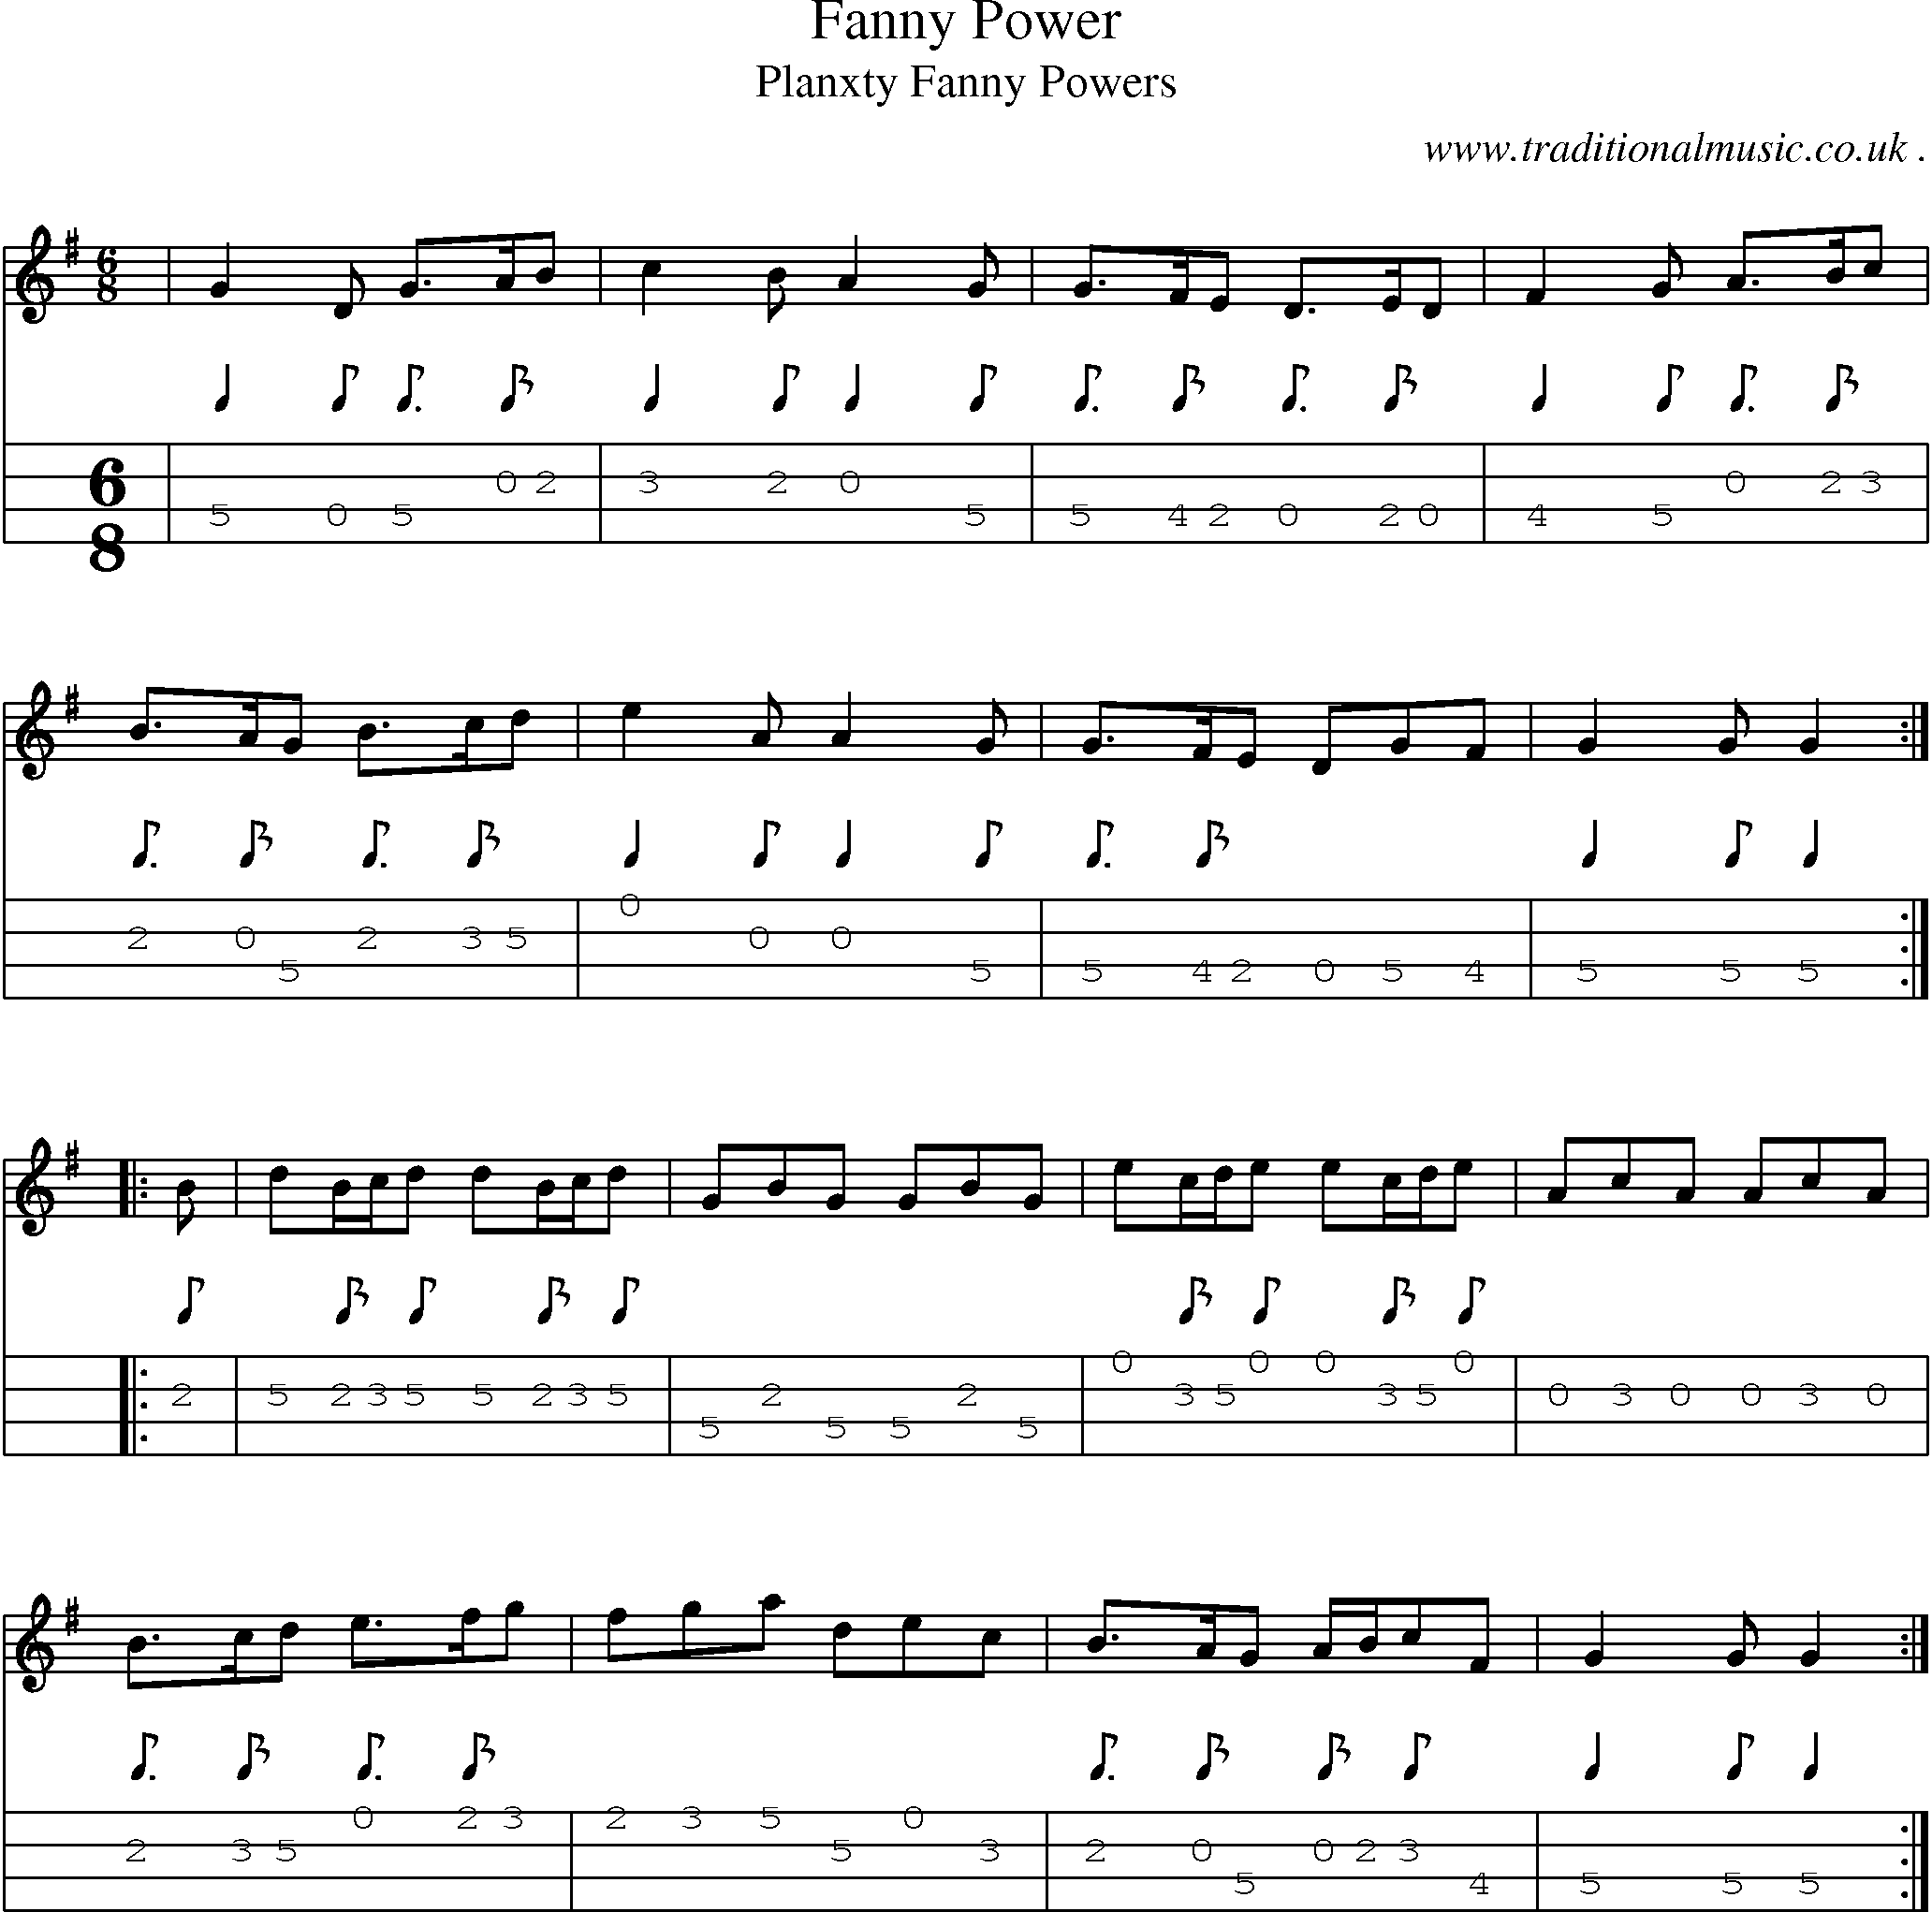 Music Score and Guitar Tabs for Fanny Power